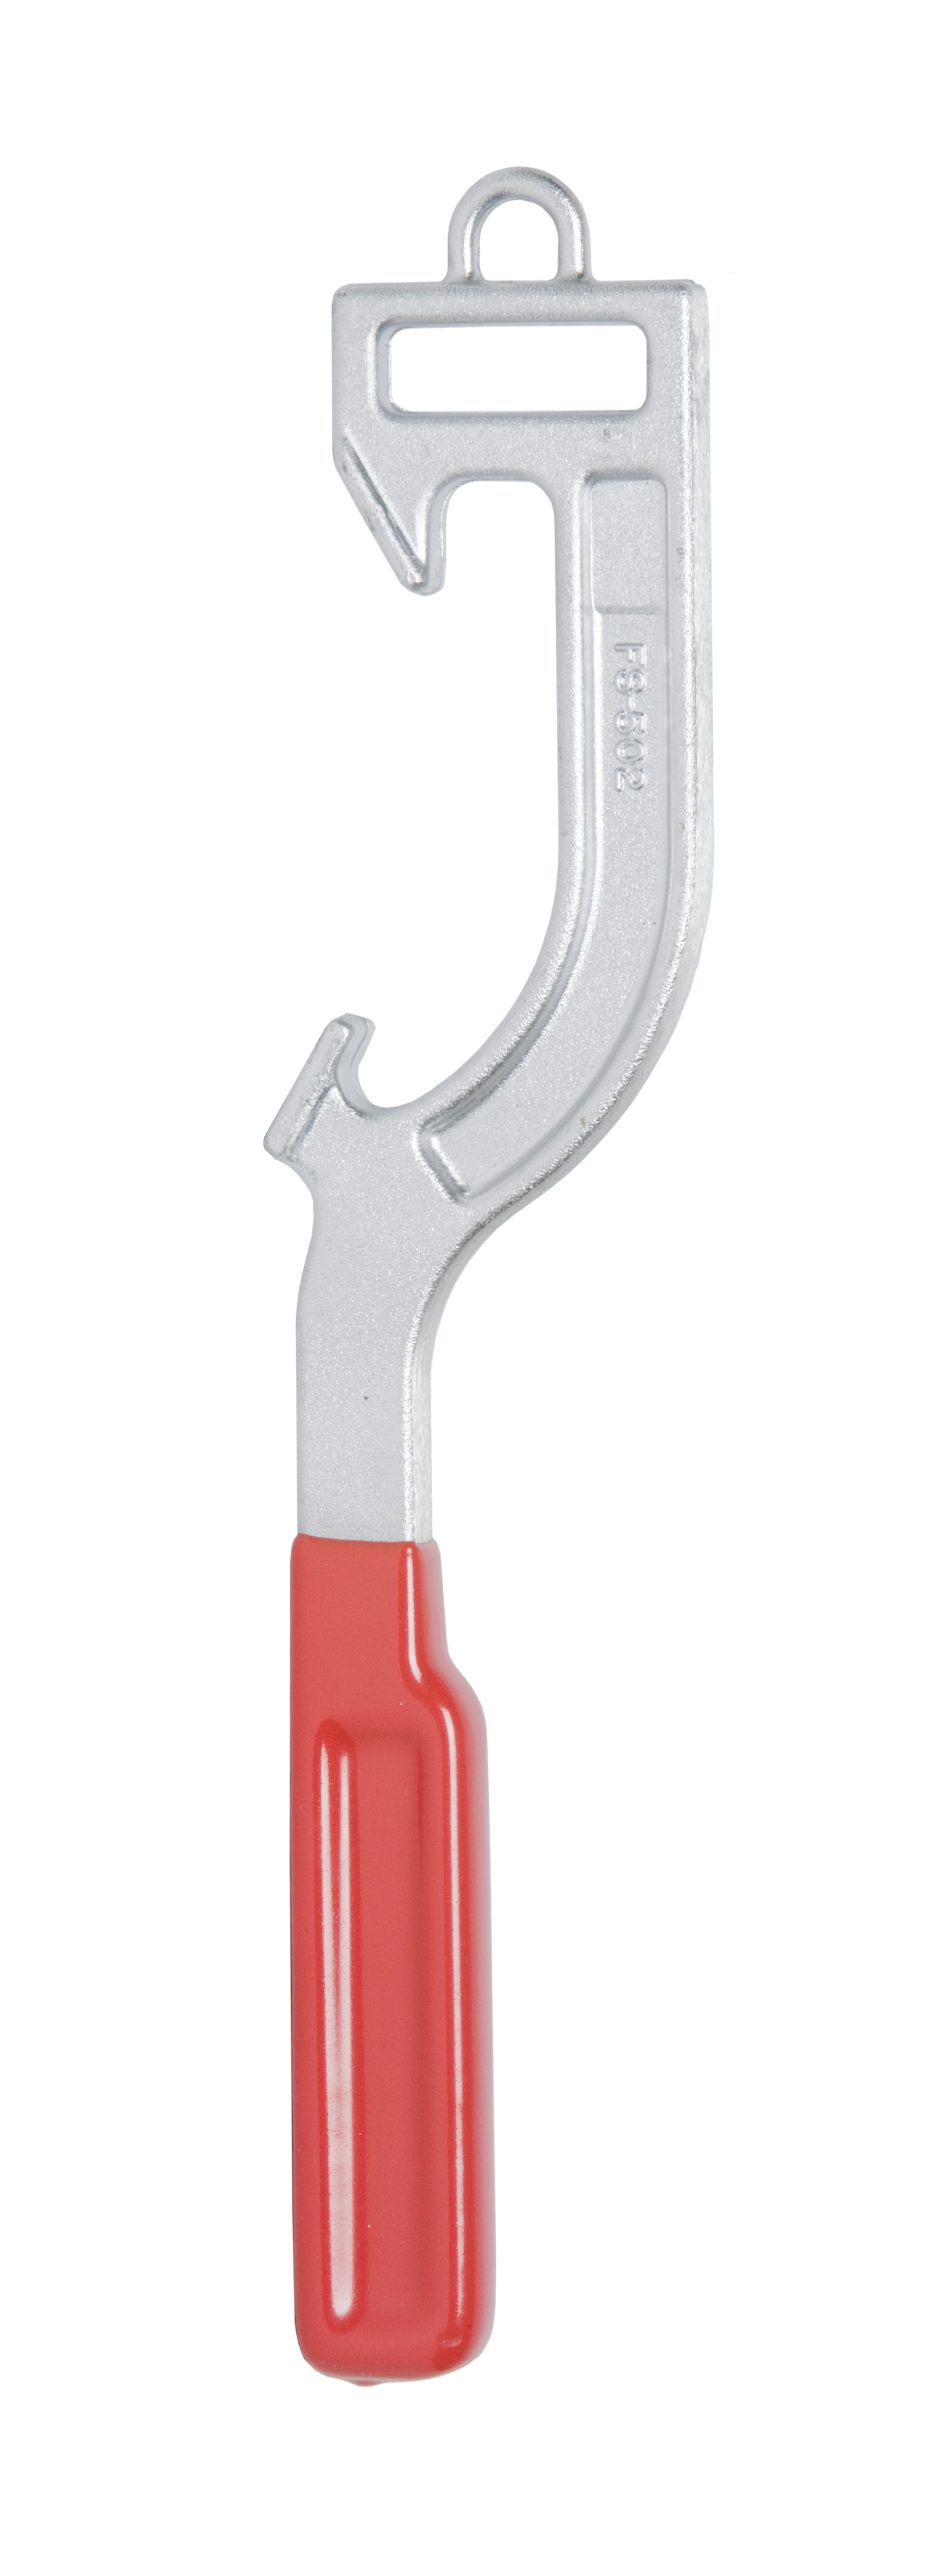 Bolt Cutters Industrial 24'' - Fire Evacuation Supplies Tools